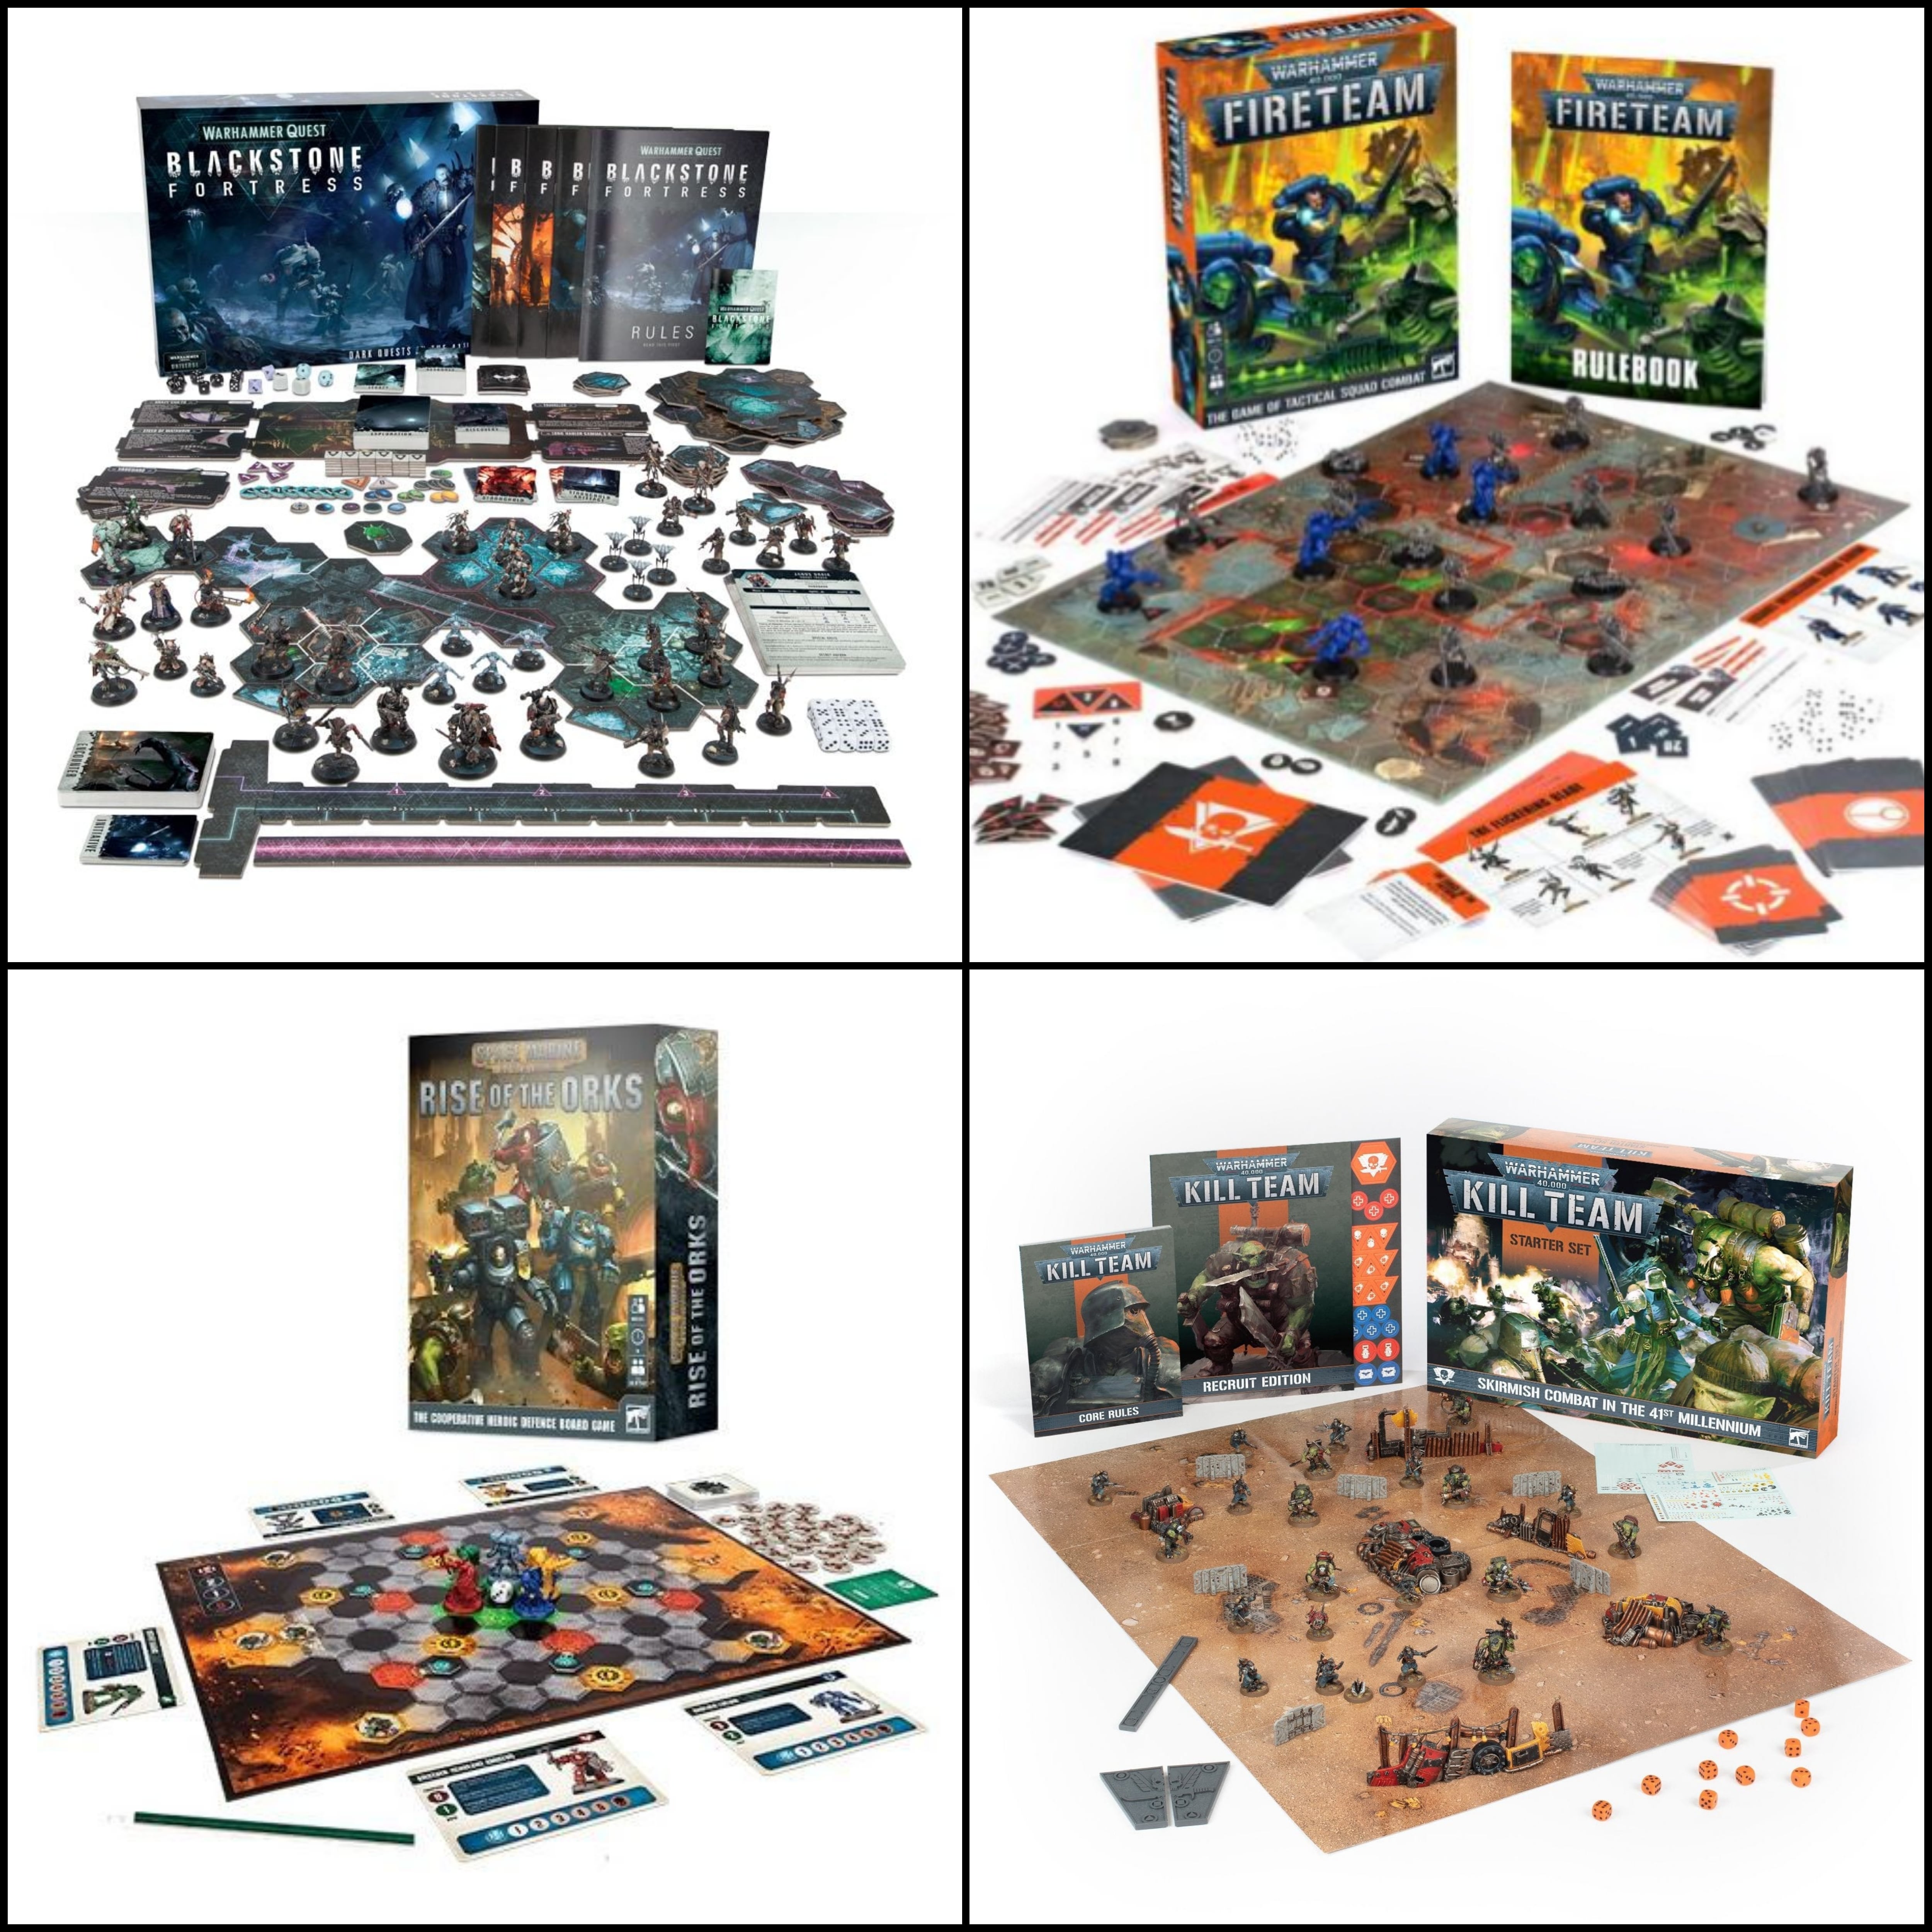 Warhammer 40k Games: Playing with Friends and Family